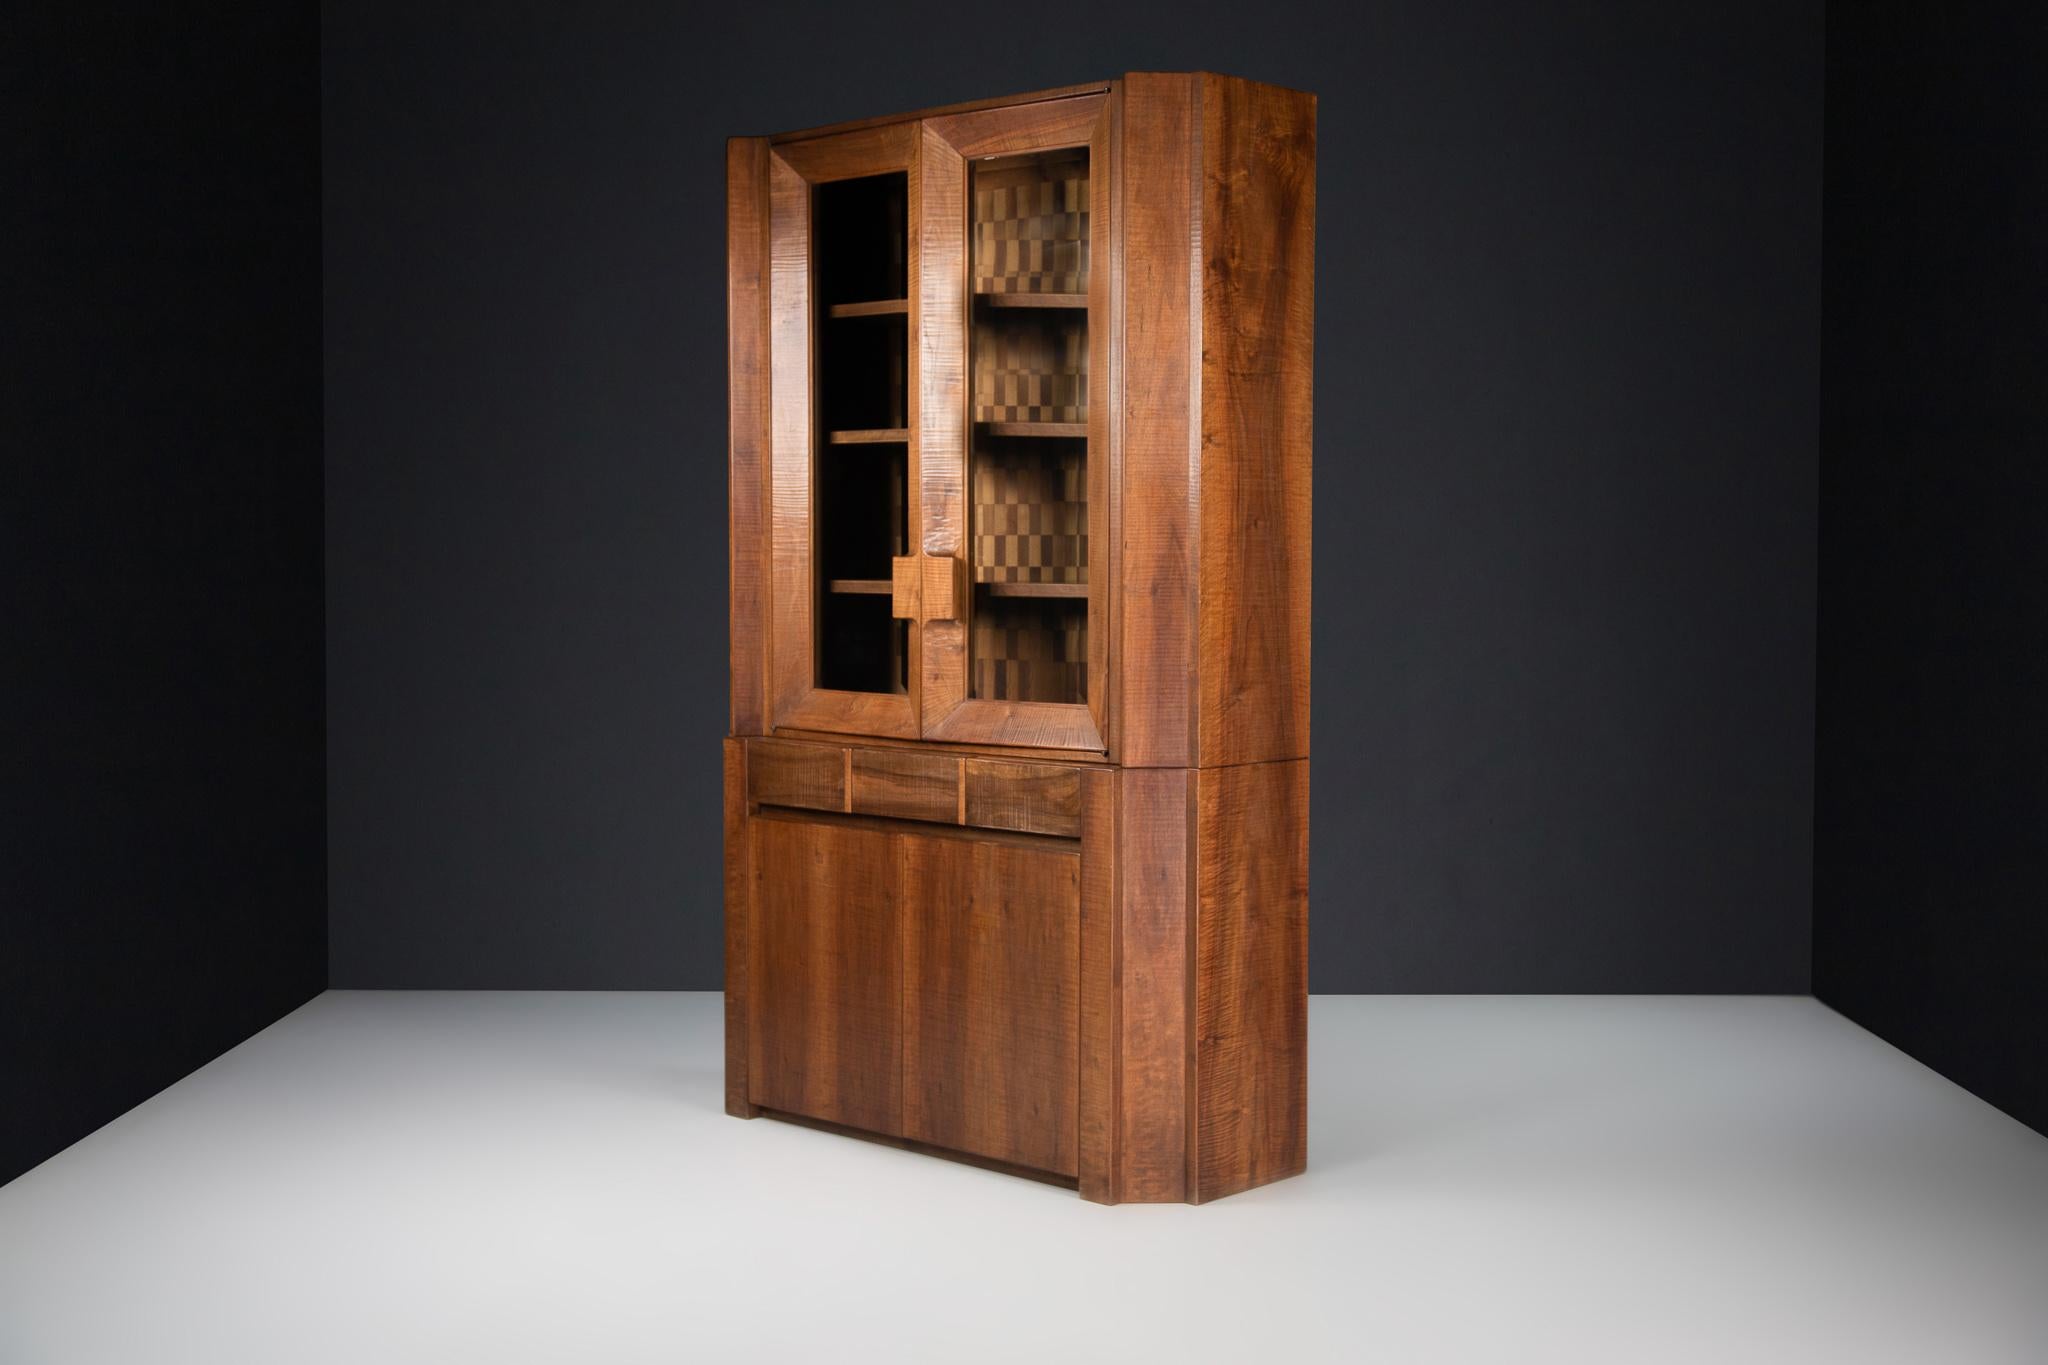 Giuseppe Rivadossi Tall Glazed Cabinet, Walnut, Italy, 1970s 

An exceptional tall glazed cabinet by the Italian sculptor and designer Giuseppe Rivadossi, featuring a high level of craftsmanship in woodwork. This piece comprises two sections: the